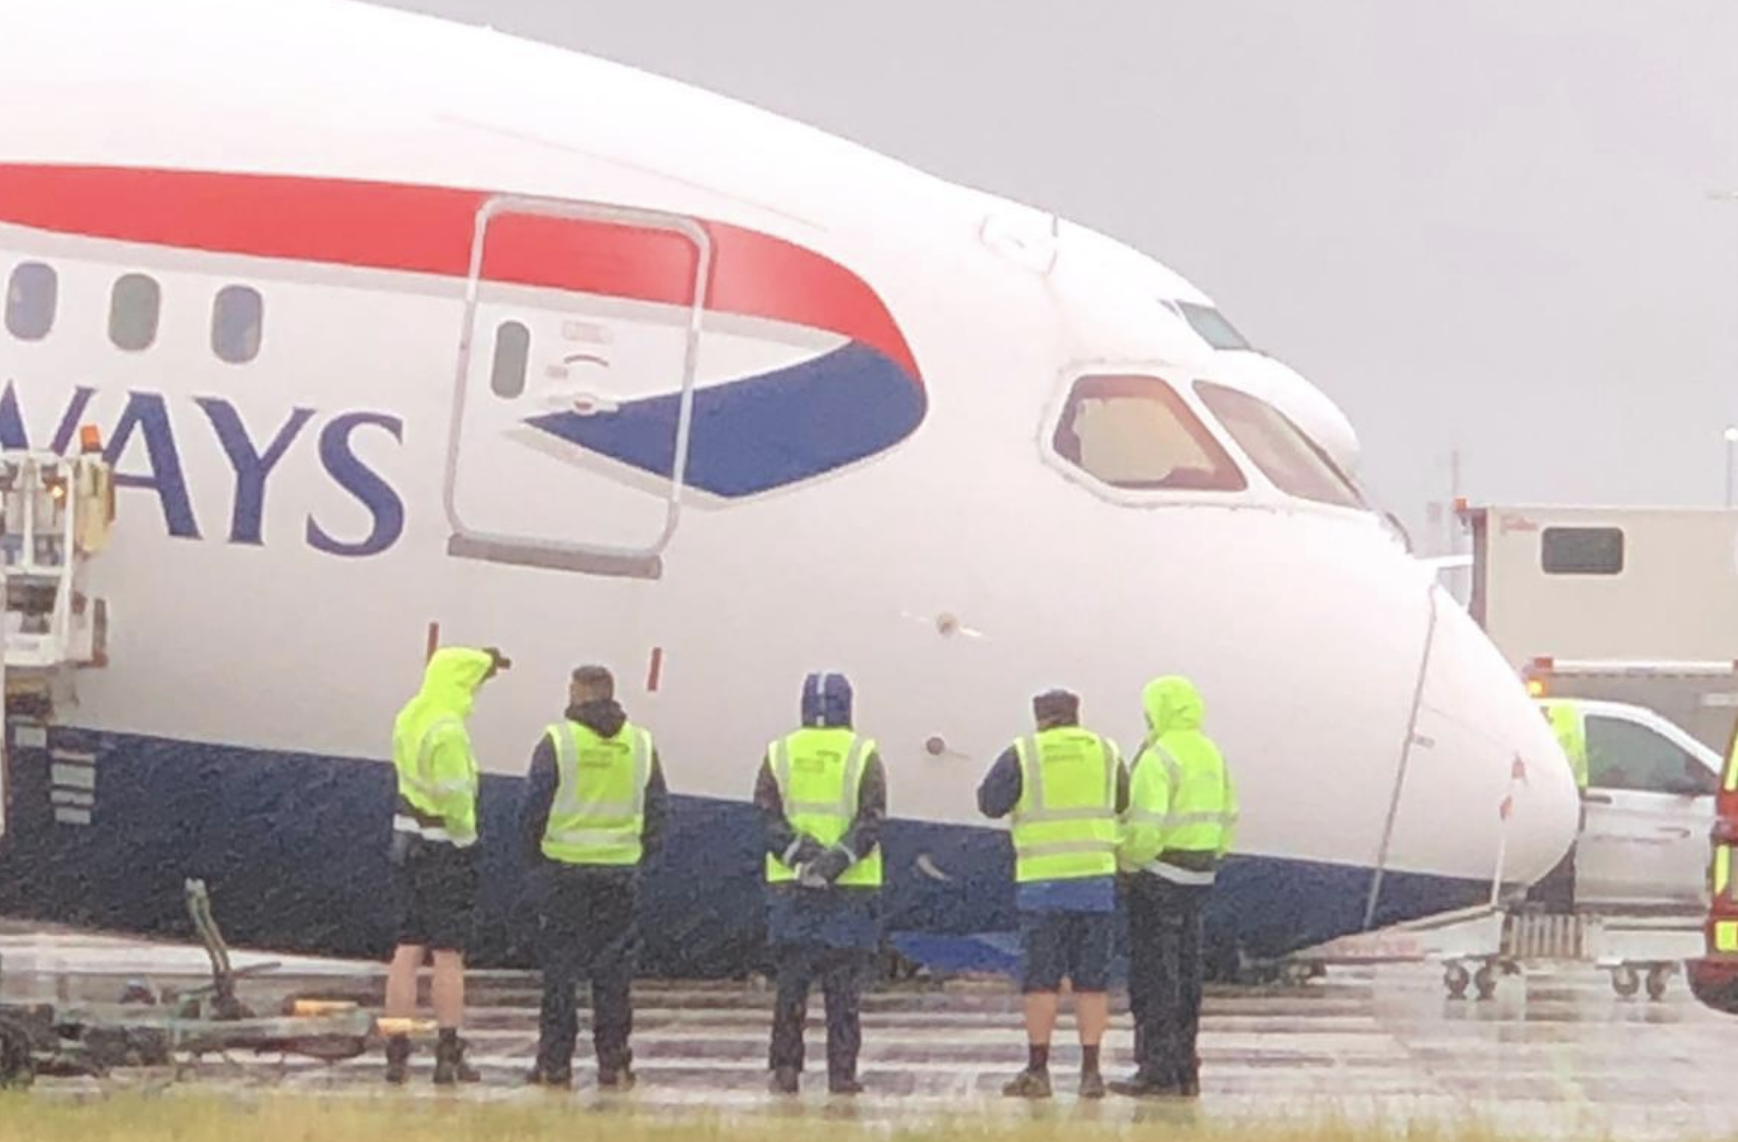 British Airways 787 Dreamliner Aircraft Suffered a Nose gear collapse at Heathrow Airport, Crew Member Injured